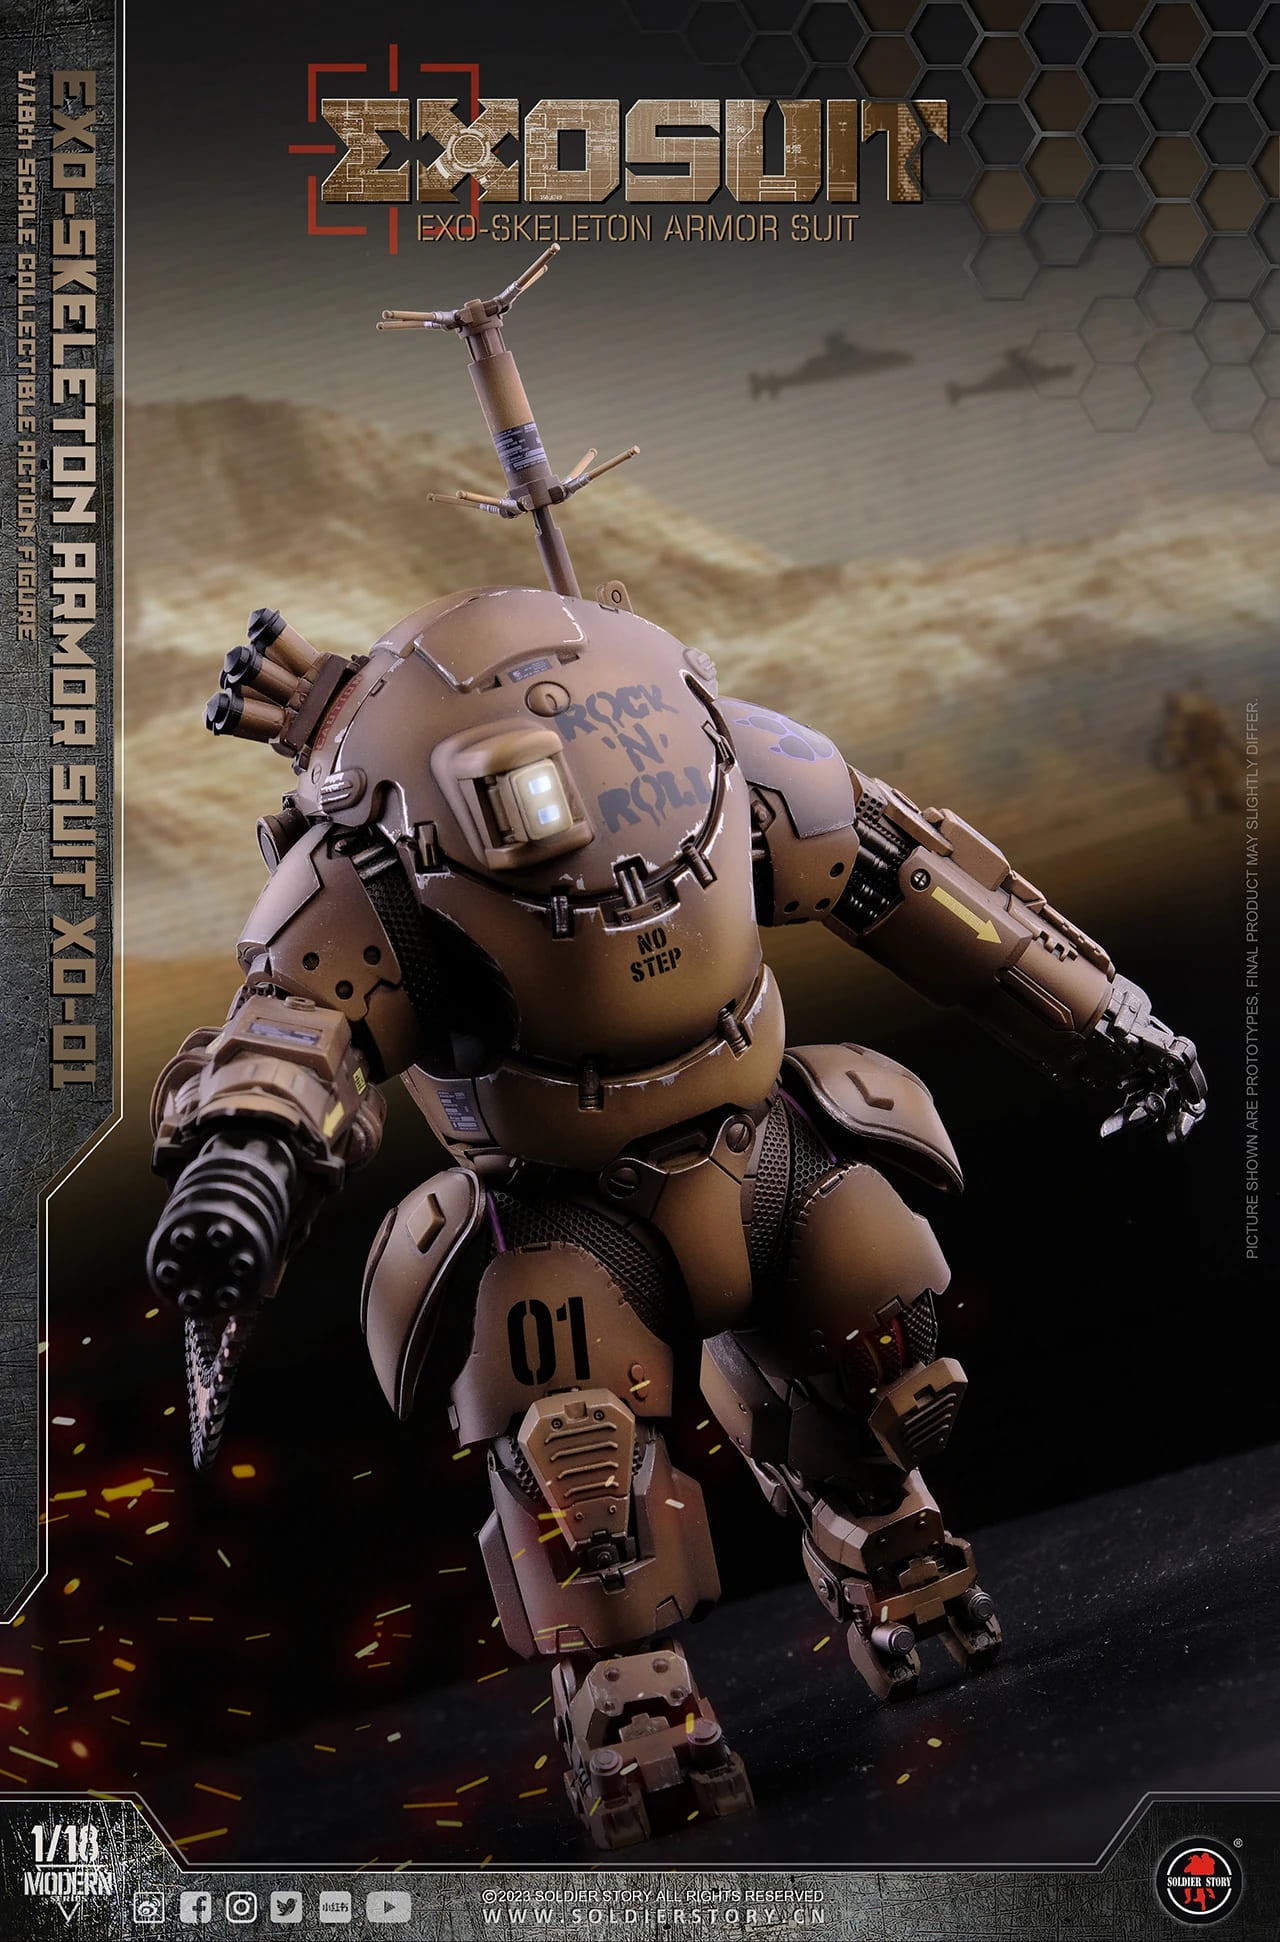 (No after sales) 1/18 Scale EXO-Skeleton Armor Suit XO-01 - Soldier Story